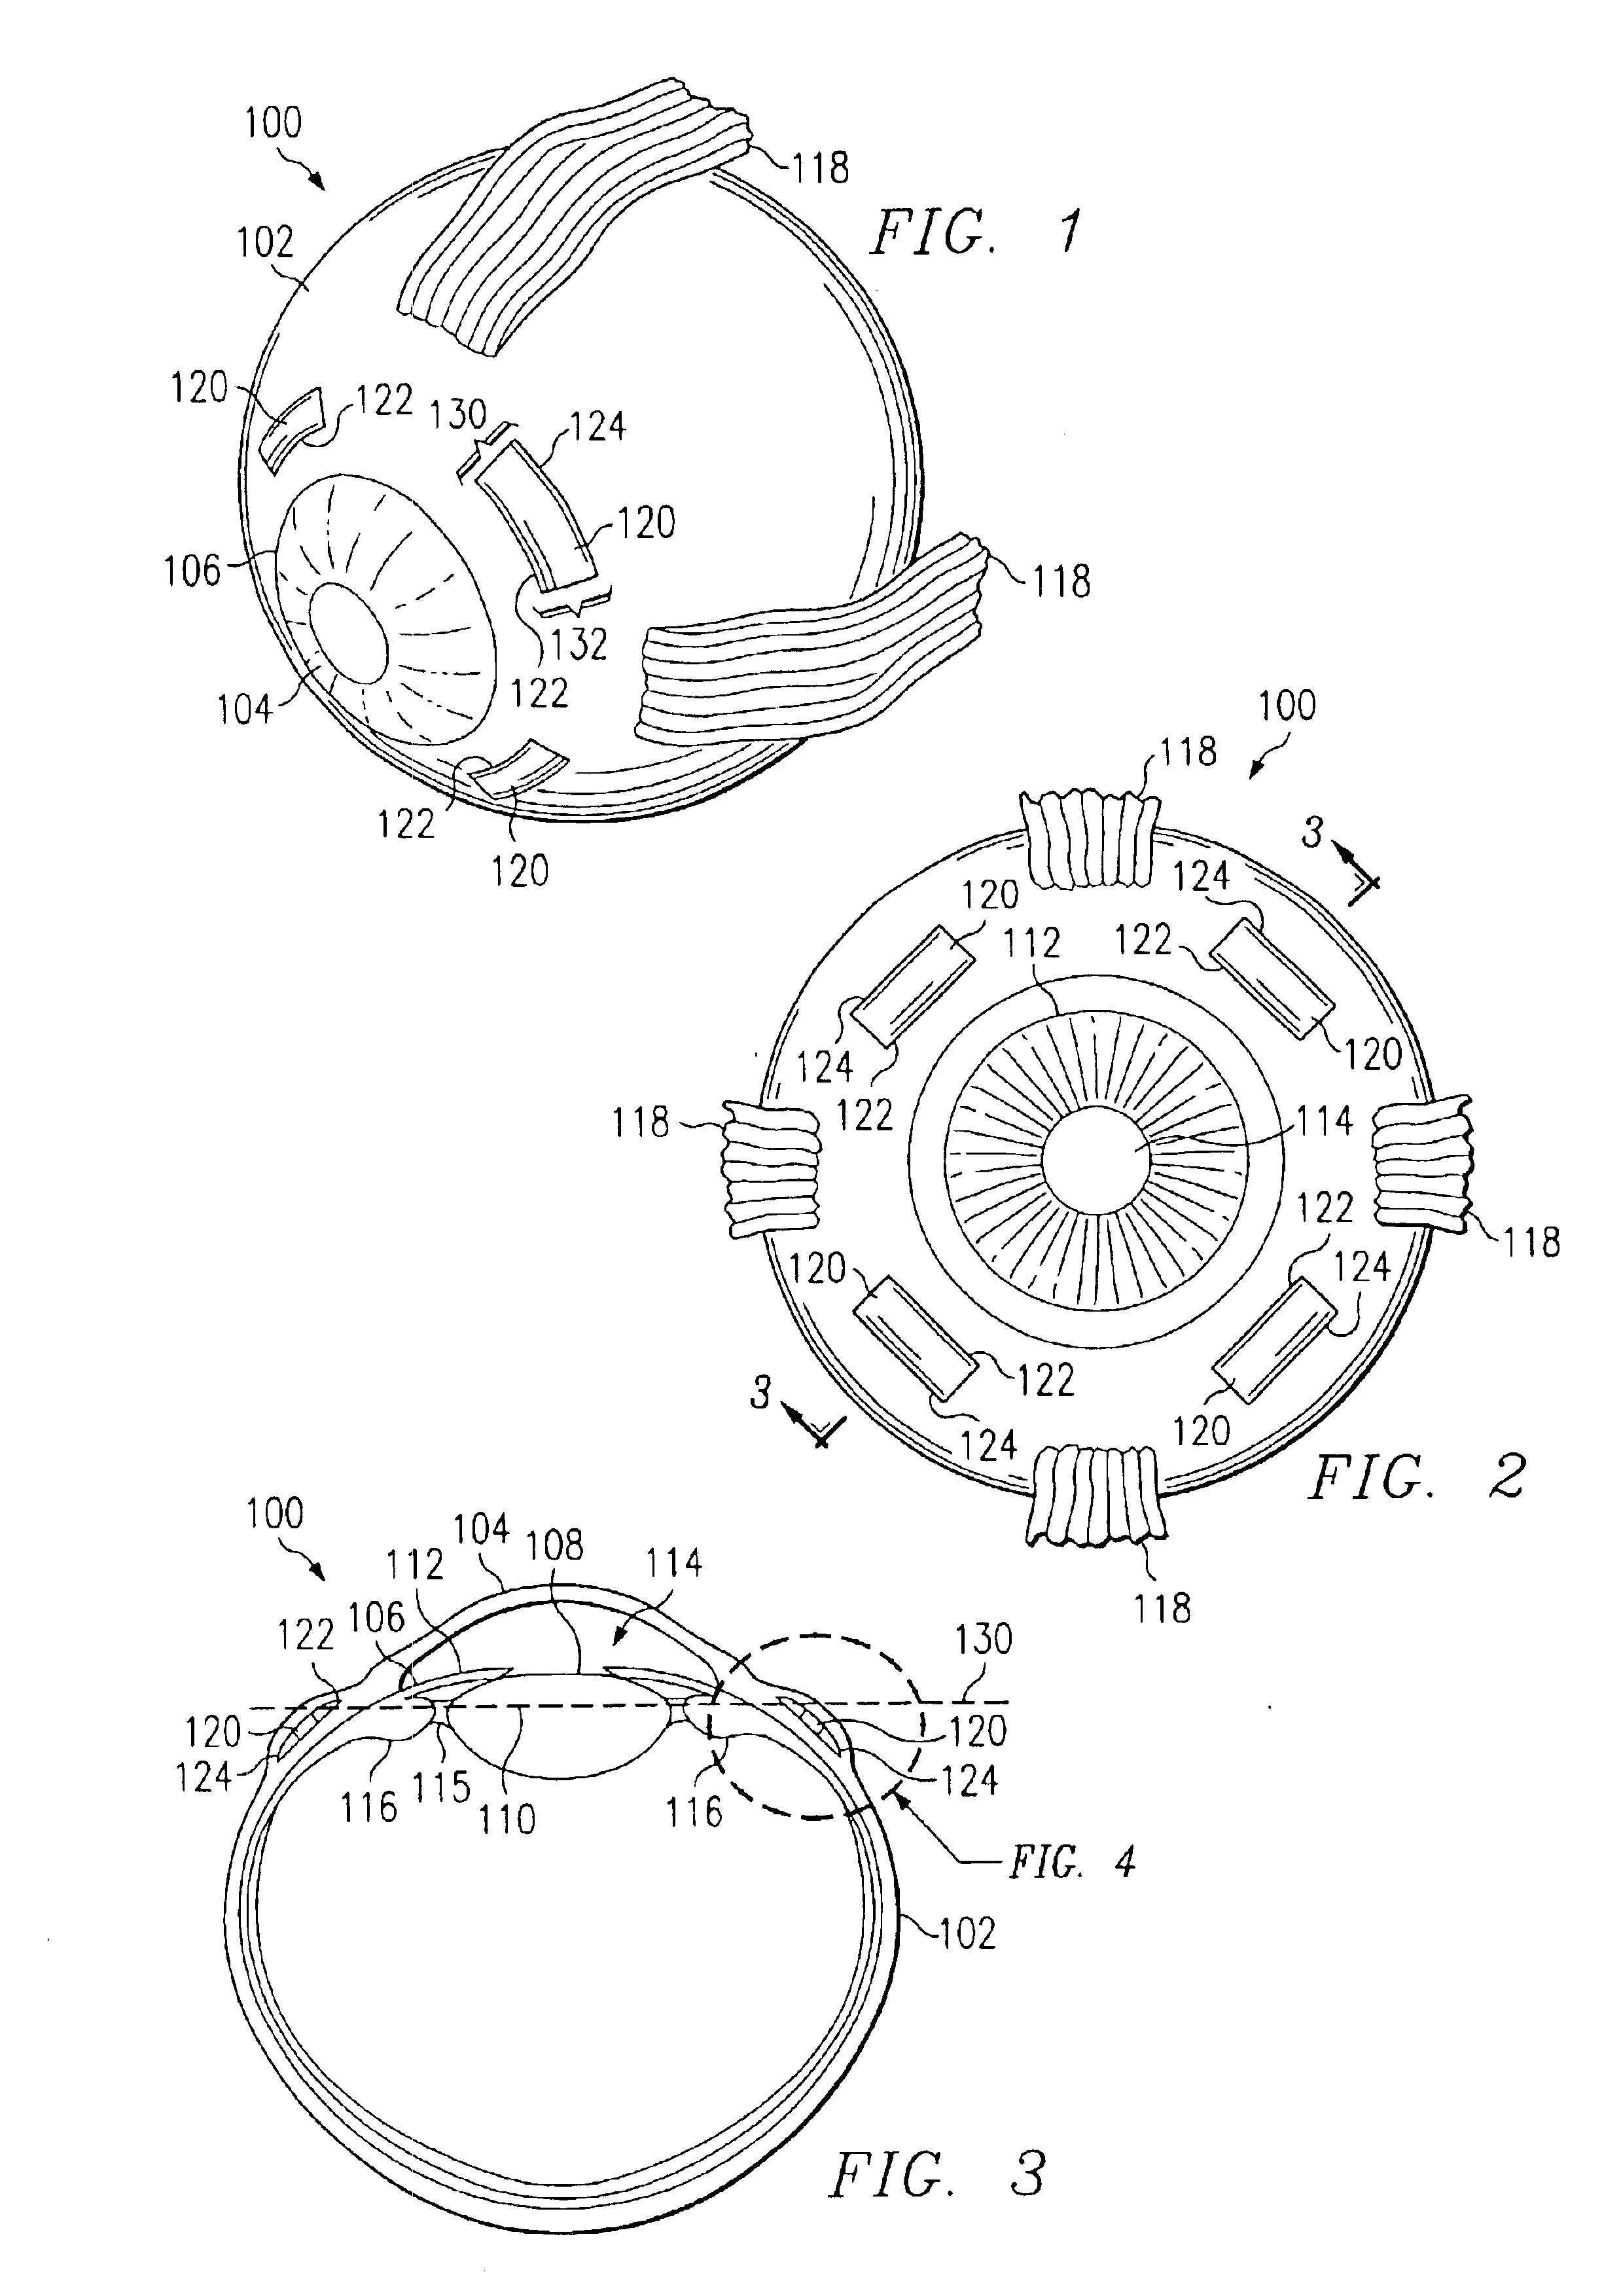 Surgical blade for use with a surgical tool for making incisions for scleral eye implants